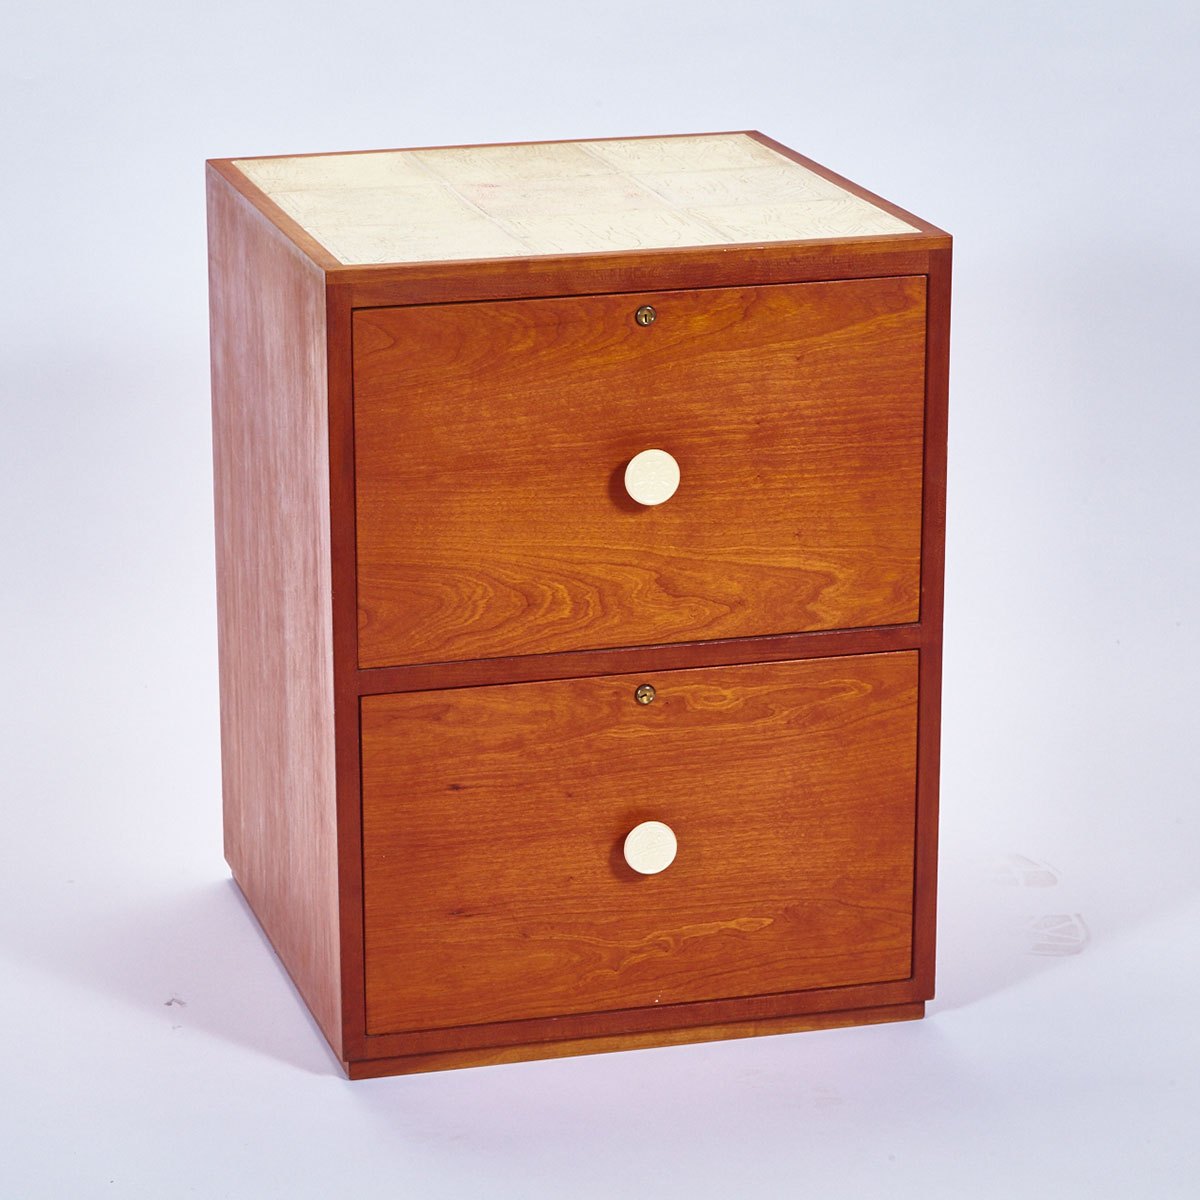 Brooklin Pottery Tile Topped Two-Drawer Filing Cabinet, Theo, Susan and Ben Harlander, 1960s